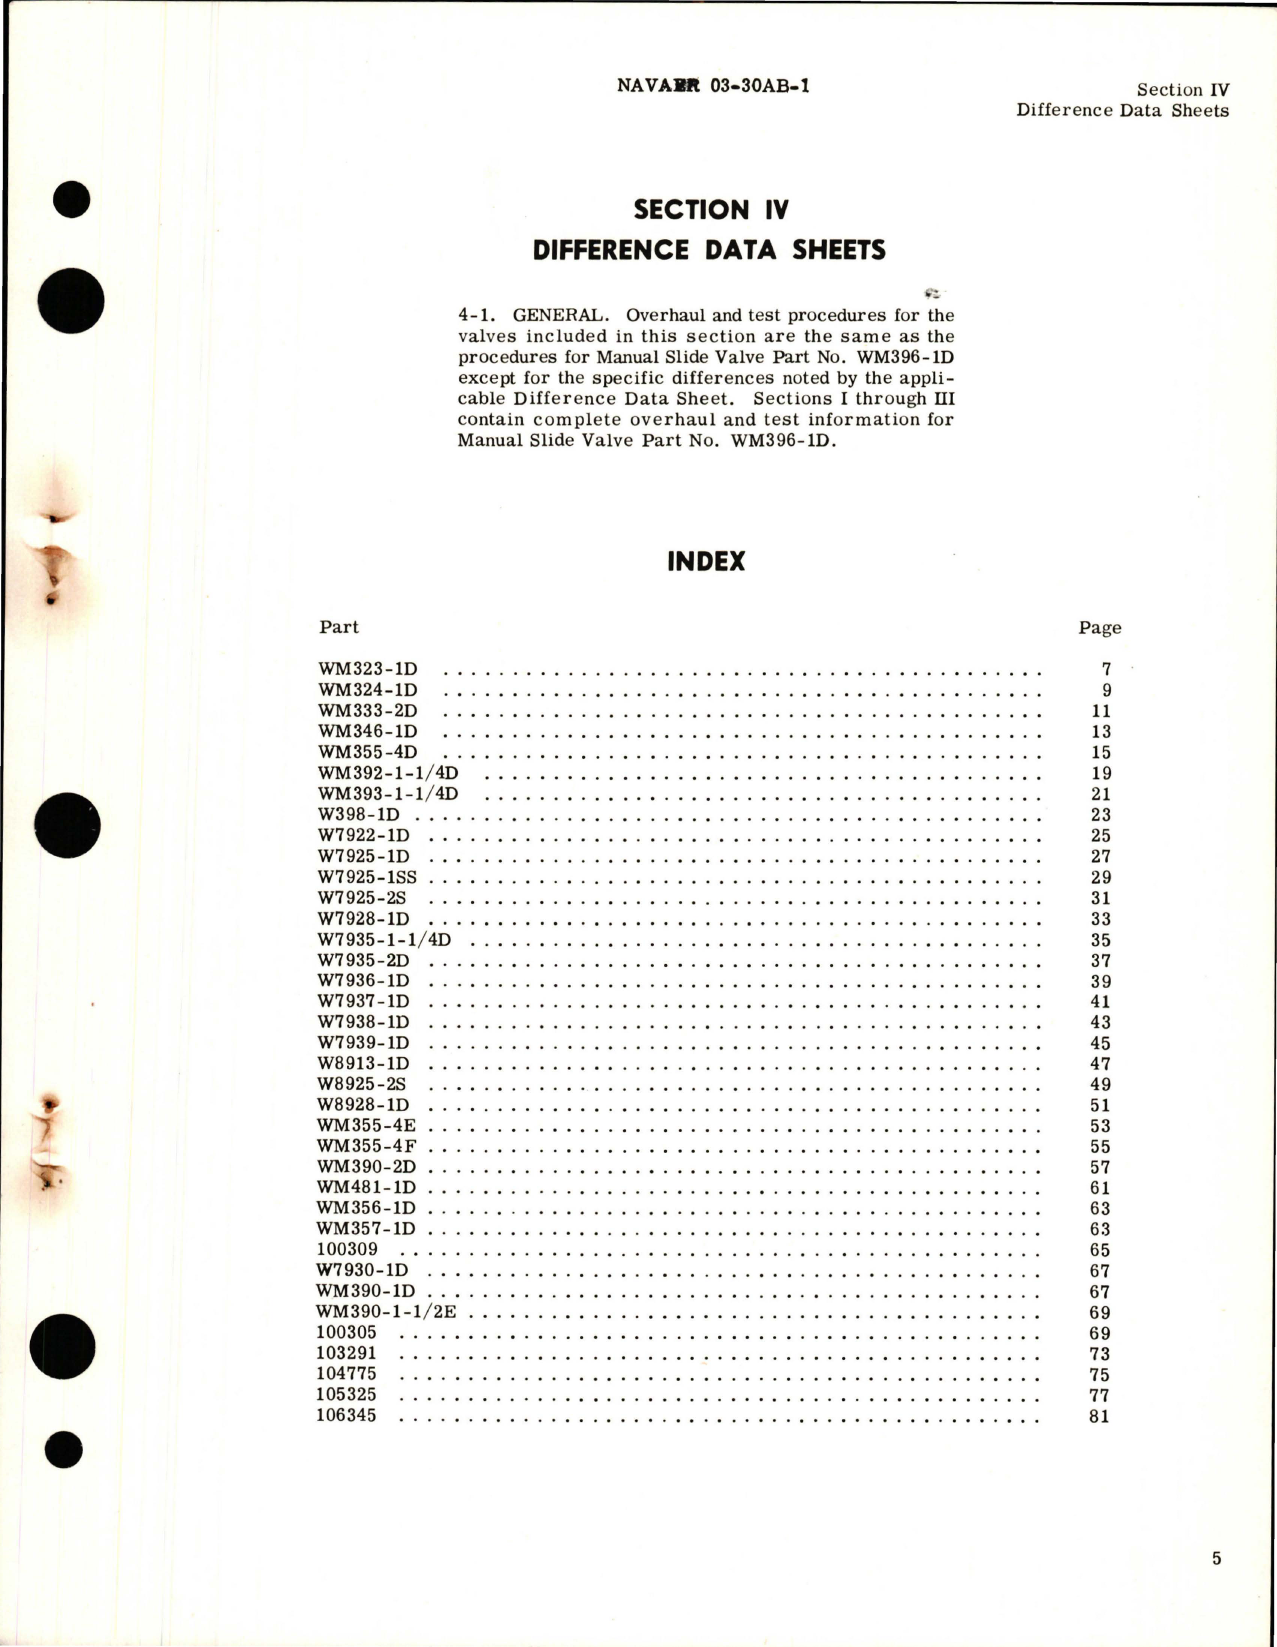 Sample page 7 from AirCorps Library document: Overhaul Instructions for Manual Slide Valve Assemblies 